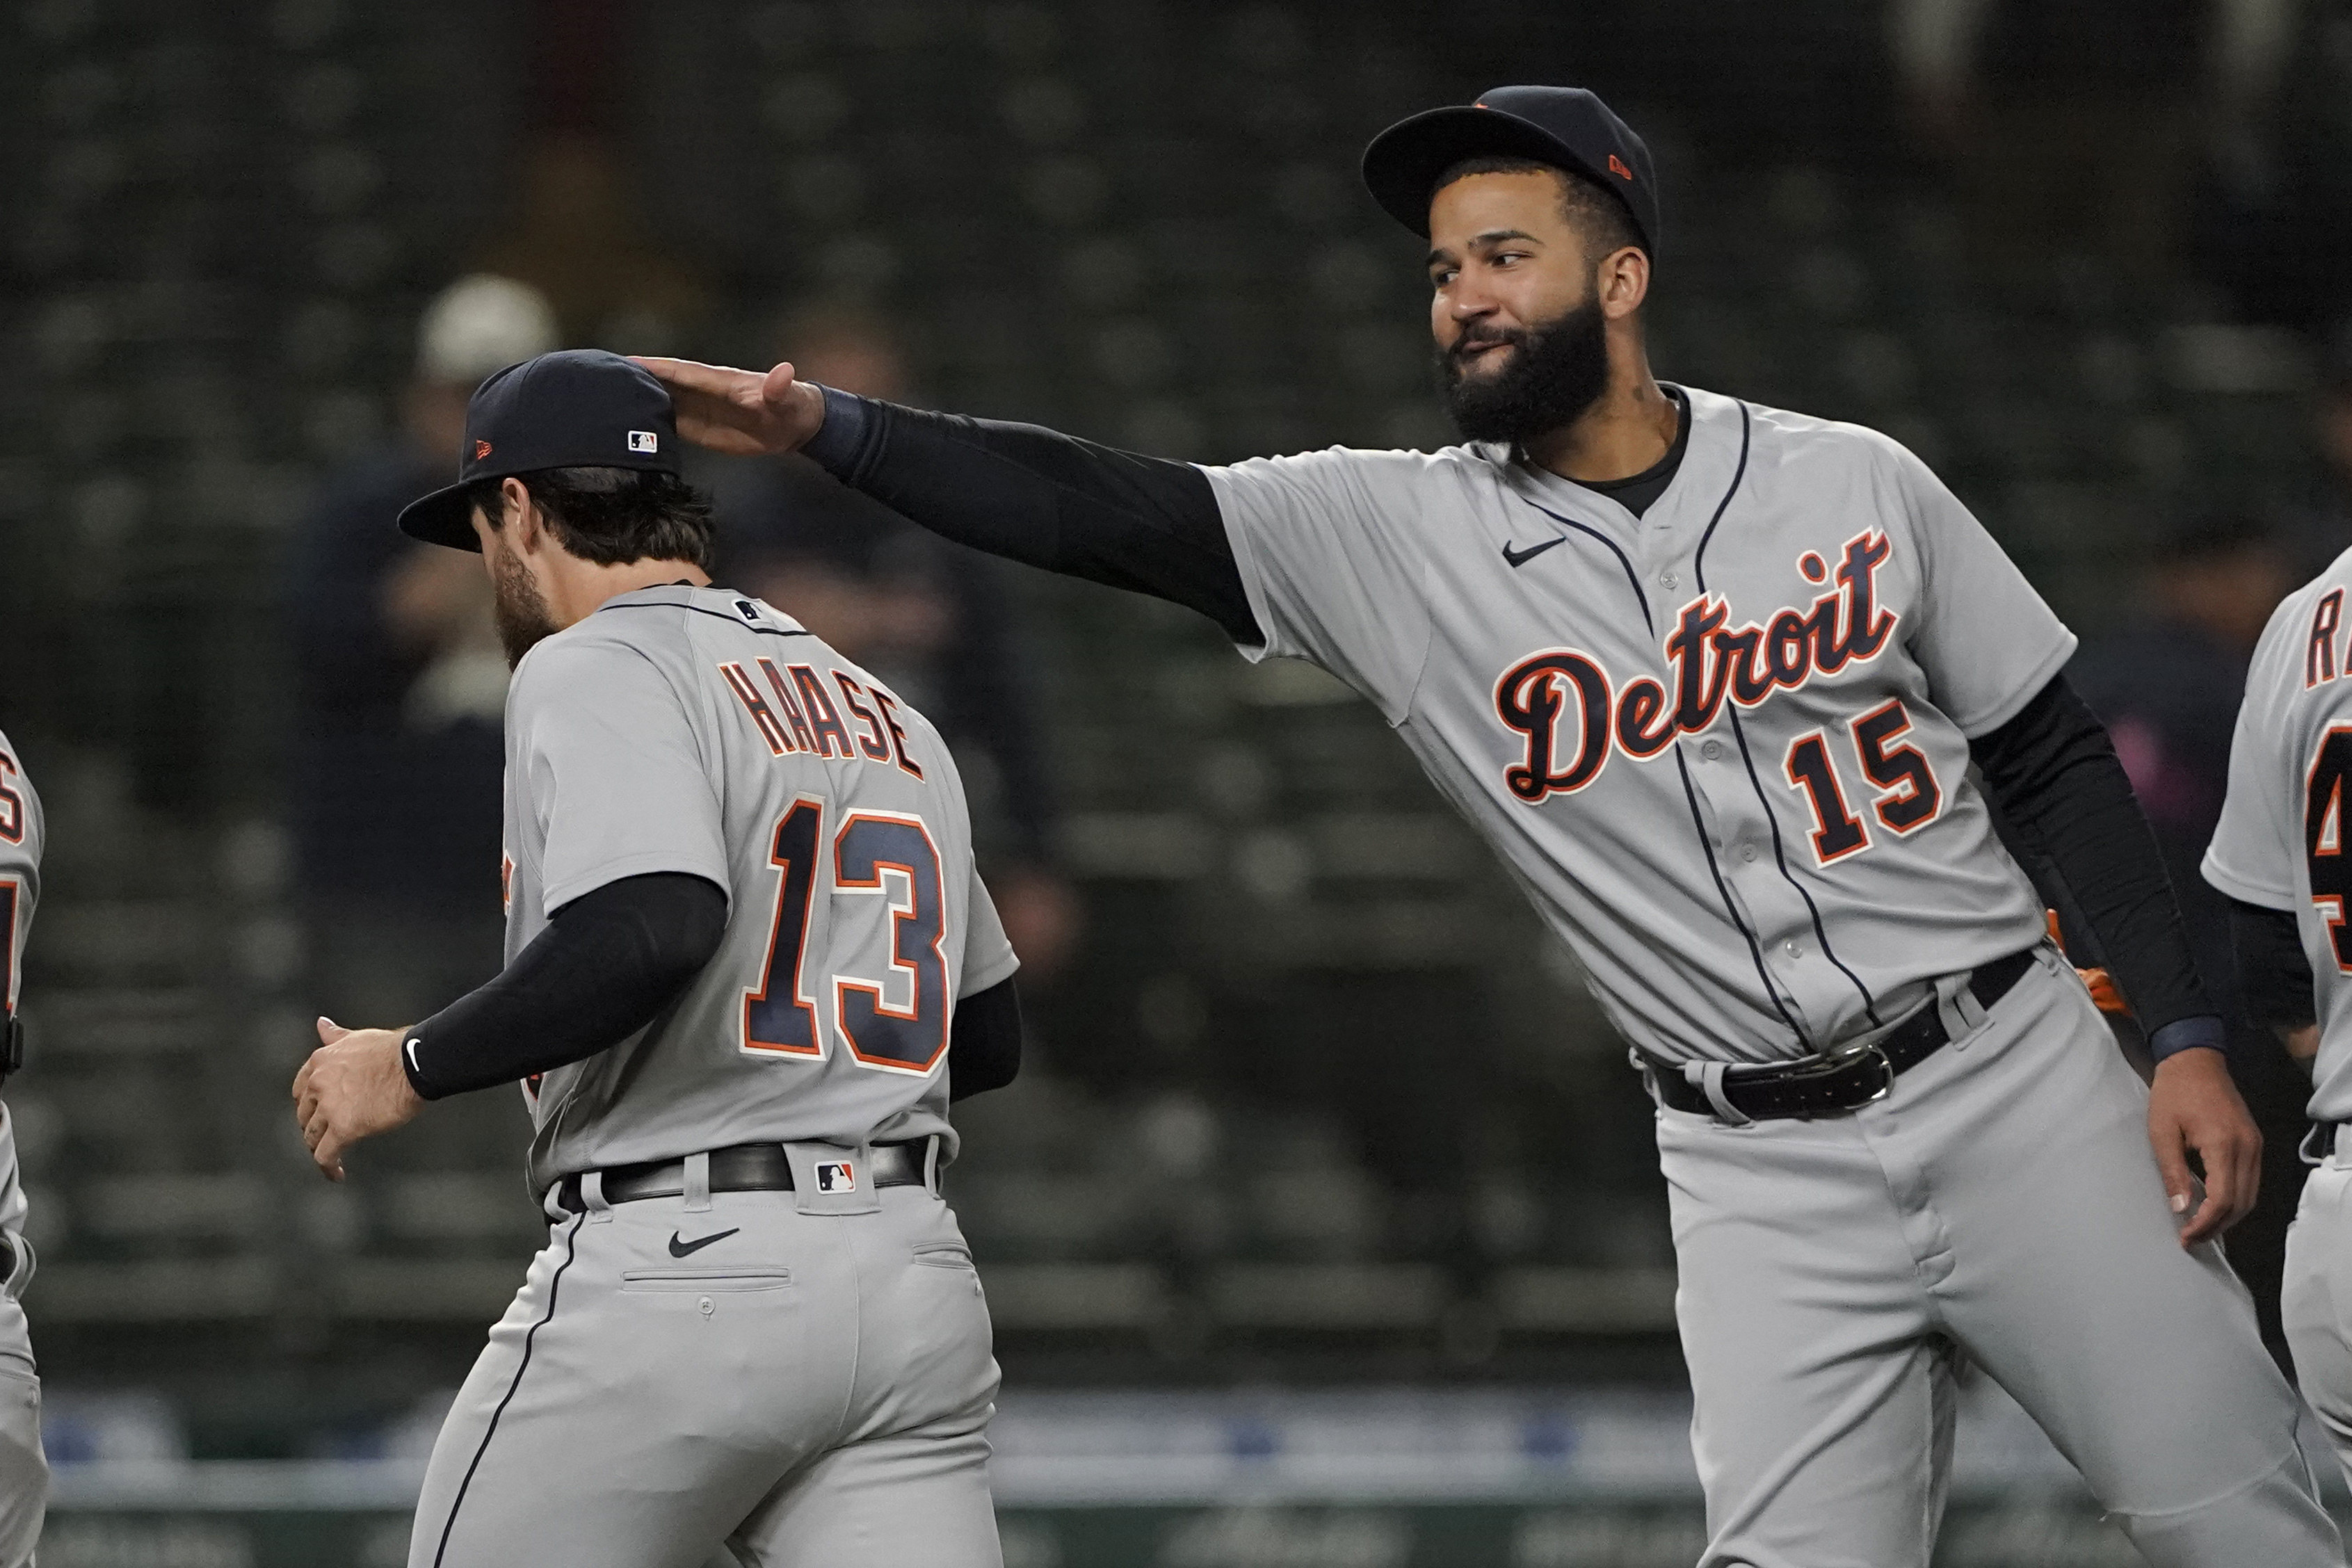 Memorable outfield debut for Tigers catcher Eric Haase: 'I don't